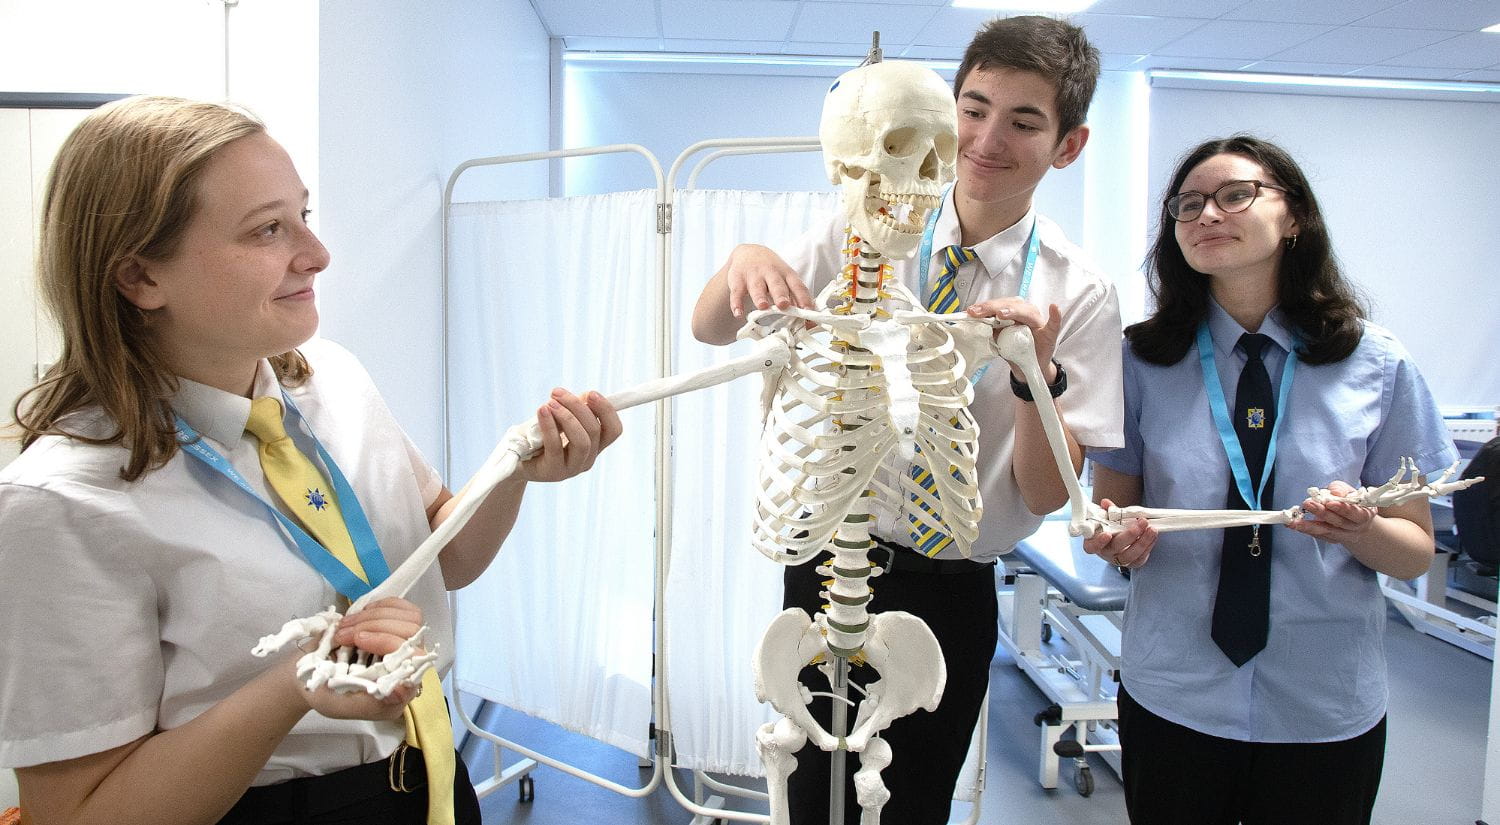 Clacton Coastal Academy students shake hands with a skeleton